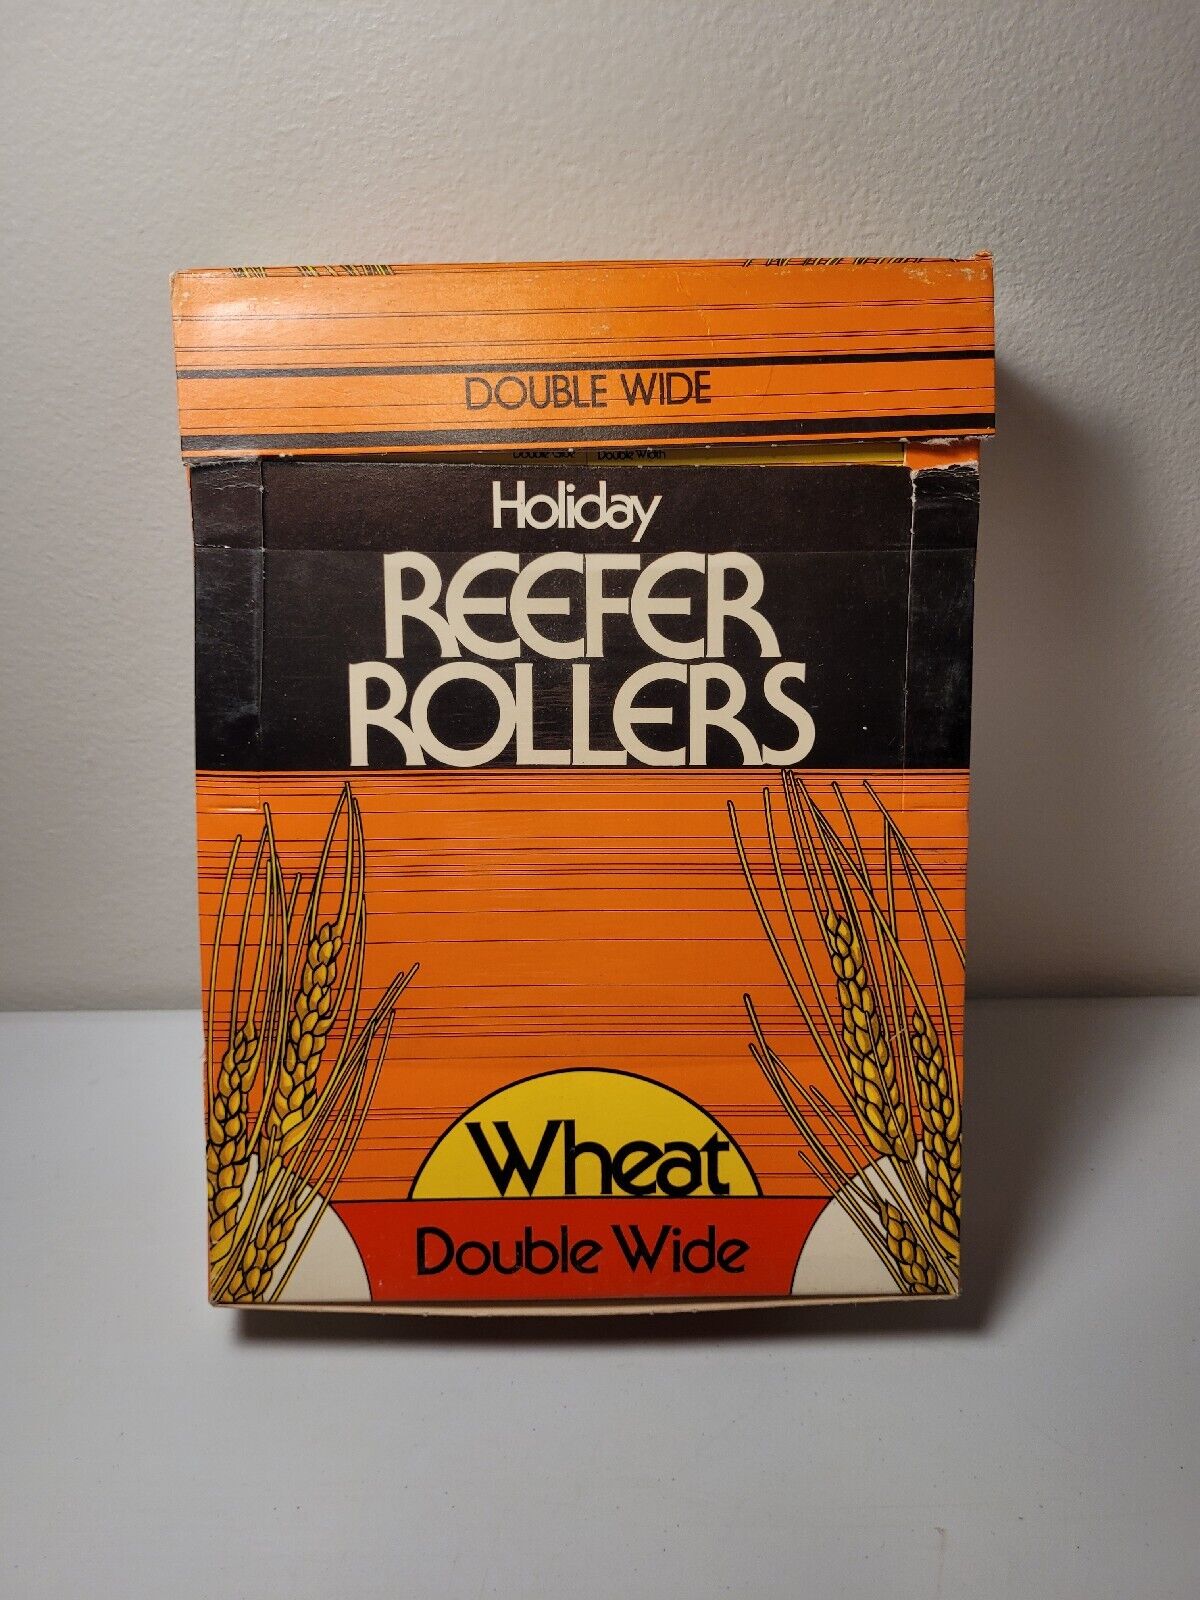 Reefer Rollers Holiday Tobacciana Vintage Box Of Papers 